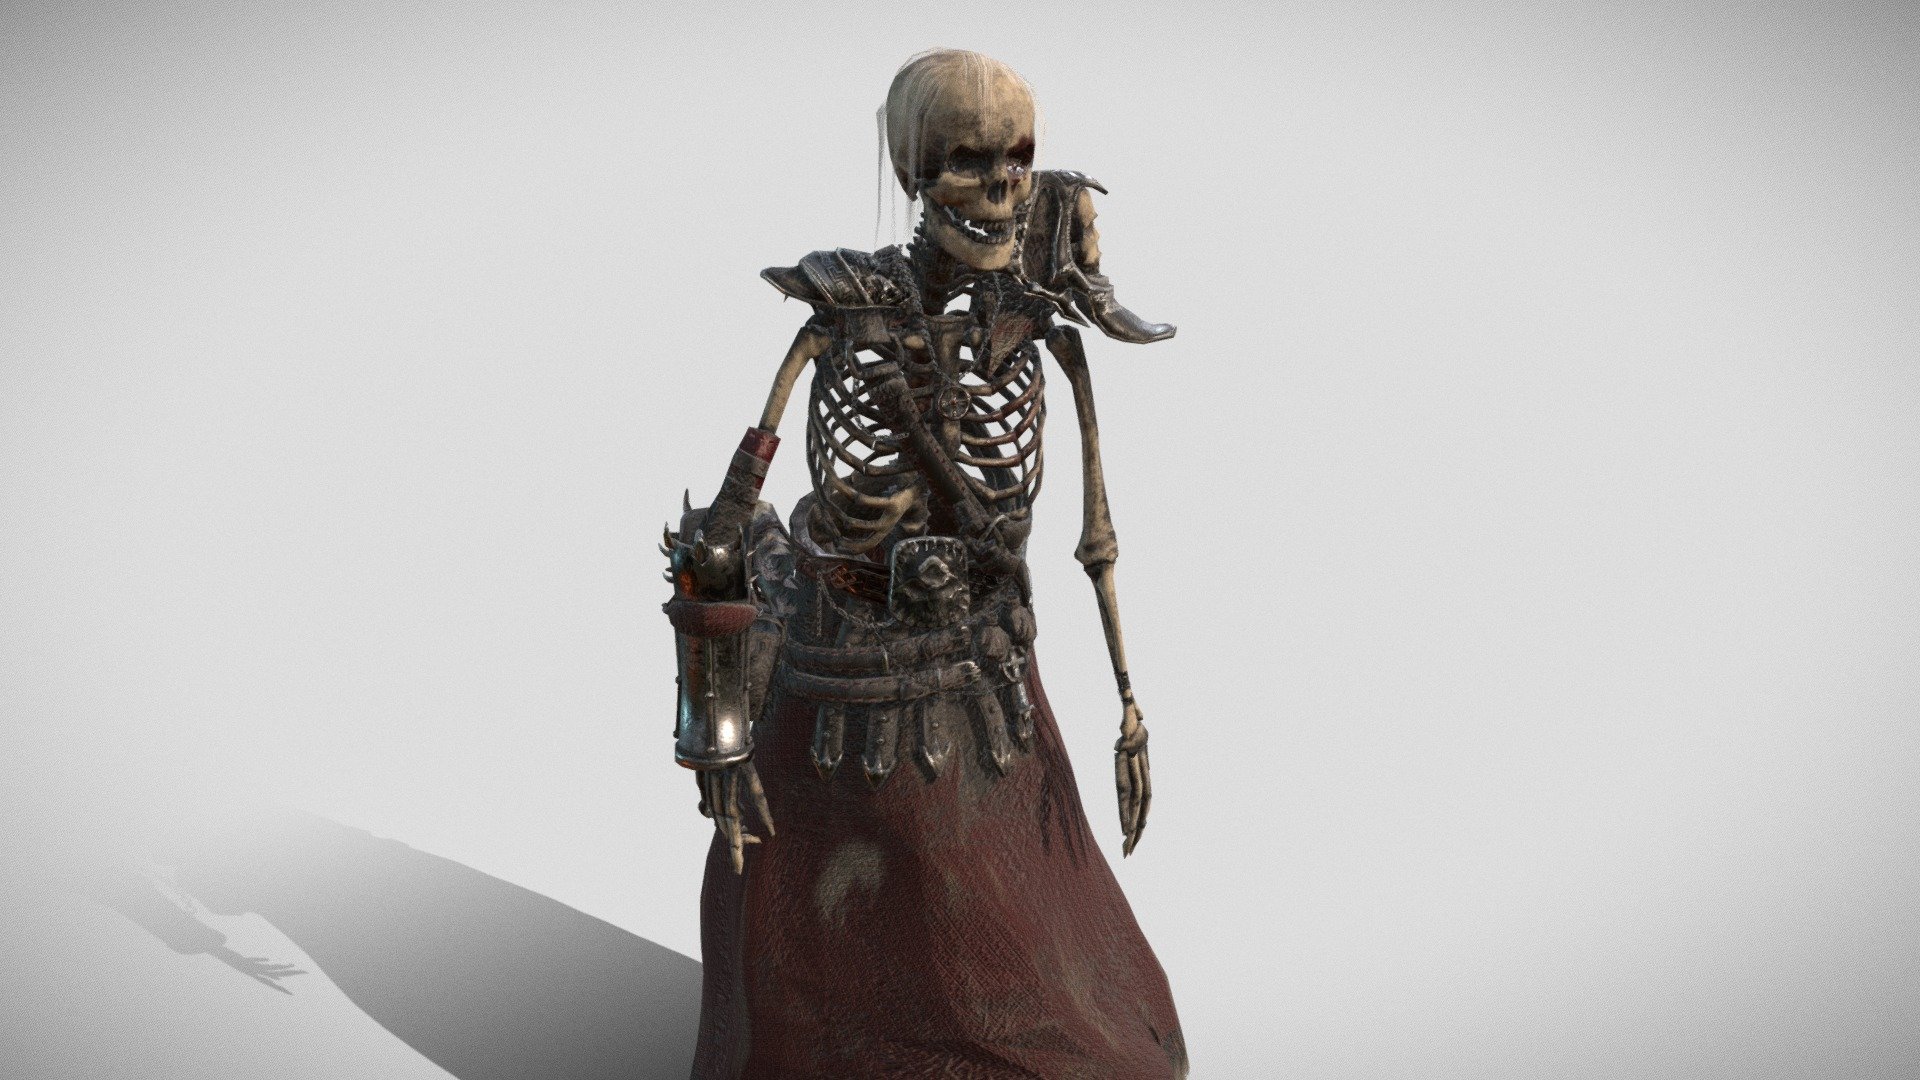 High-quality skeleton wizard model focused on game development with PBR textures. Executed without plug-ins, is ready for use in a variety of formats (you can write if you need a specific). Includes a demo scene for the Unity.

 Included:

Character Model - 23,206 verts

Sets of texture (3 variations):

Color 4096x4096 Metallic 4096x4096 Roughness 4096x4096 Normal 4096x4096

Unity uses 2 materials, standard and double-sided. Download the .unitypackage to get the correct material and texture settings.

Animations: Idle, IdleCasting, Walk, Run, Death1, Death2, React1, React2, Bow shot, Melee Attack1, Melee Attack2, Left Hand Melee Attack1, Left Hand Melee Attack2, Left Hand Melee Attack3, Casting Attack 1, Casting Attack 2, Casting Attack 3, Casting Attack 4 3d model